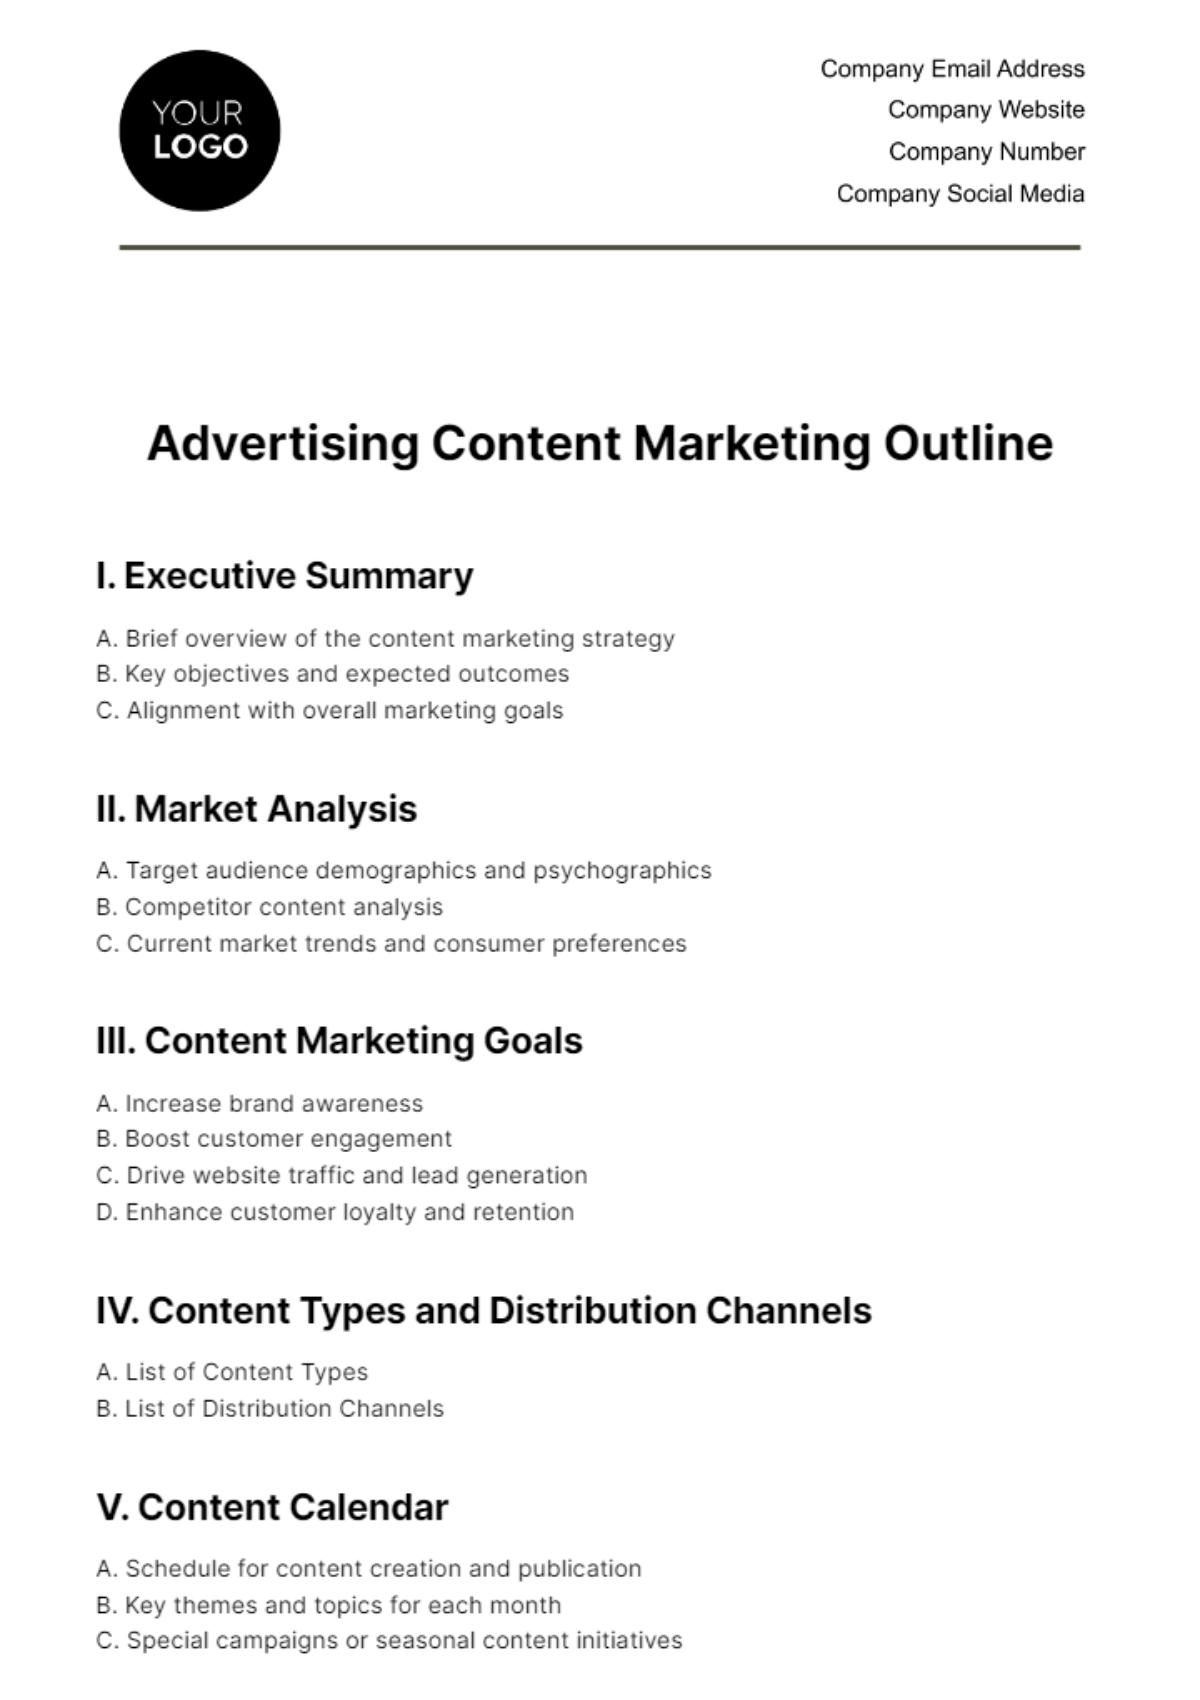 Advertising Content Marketing Outline Template